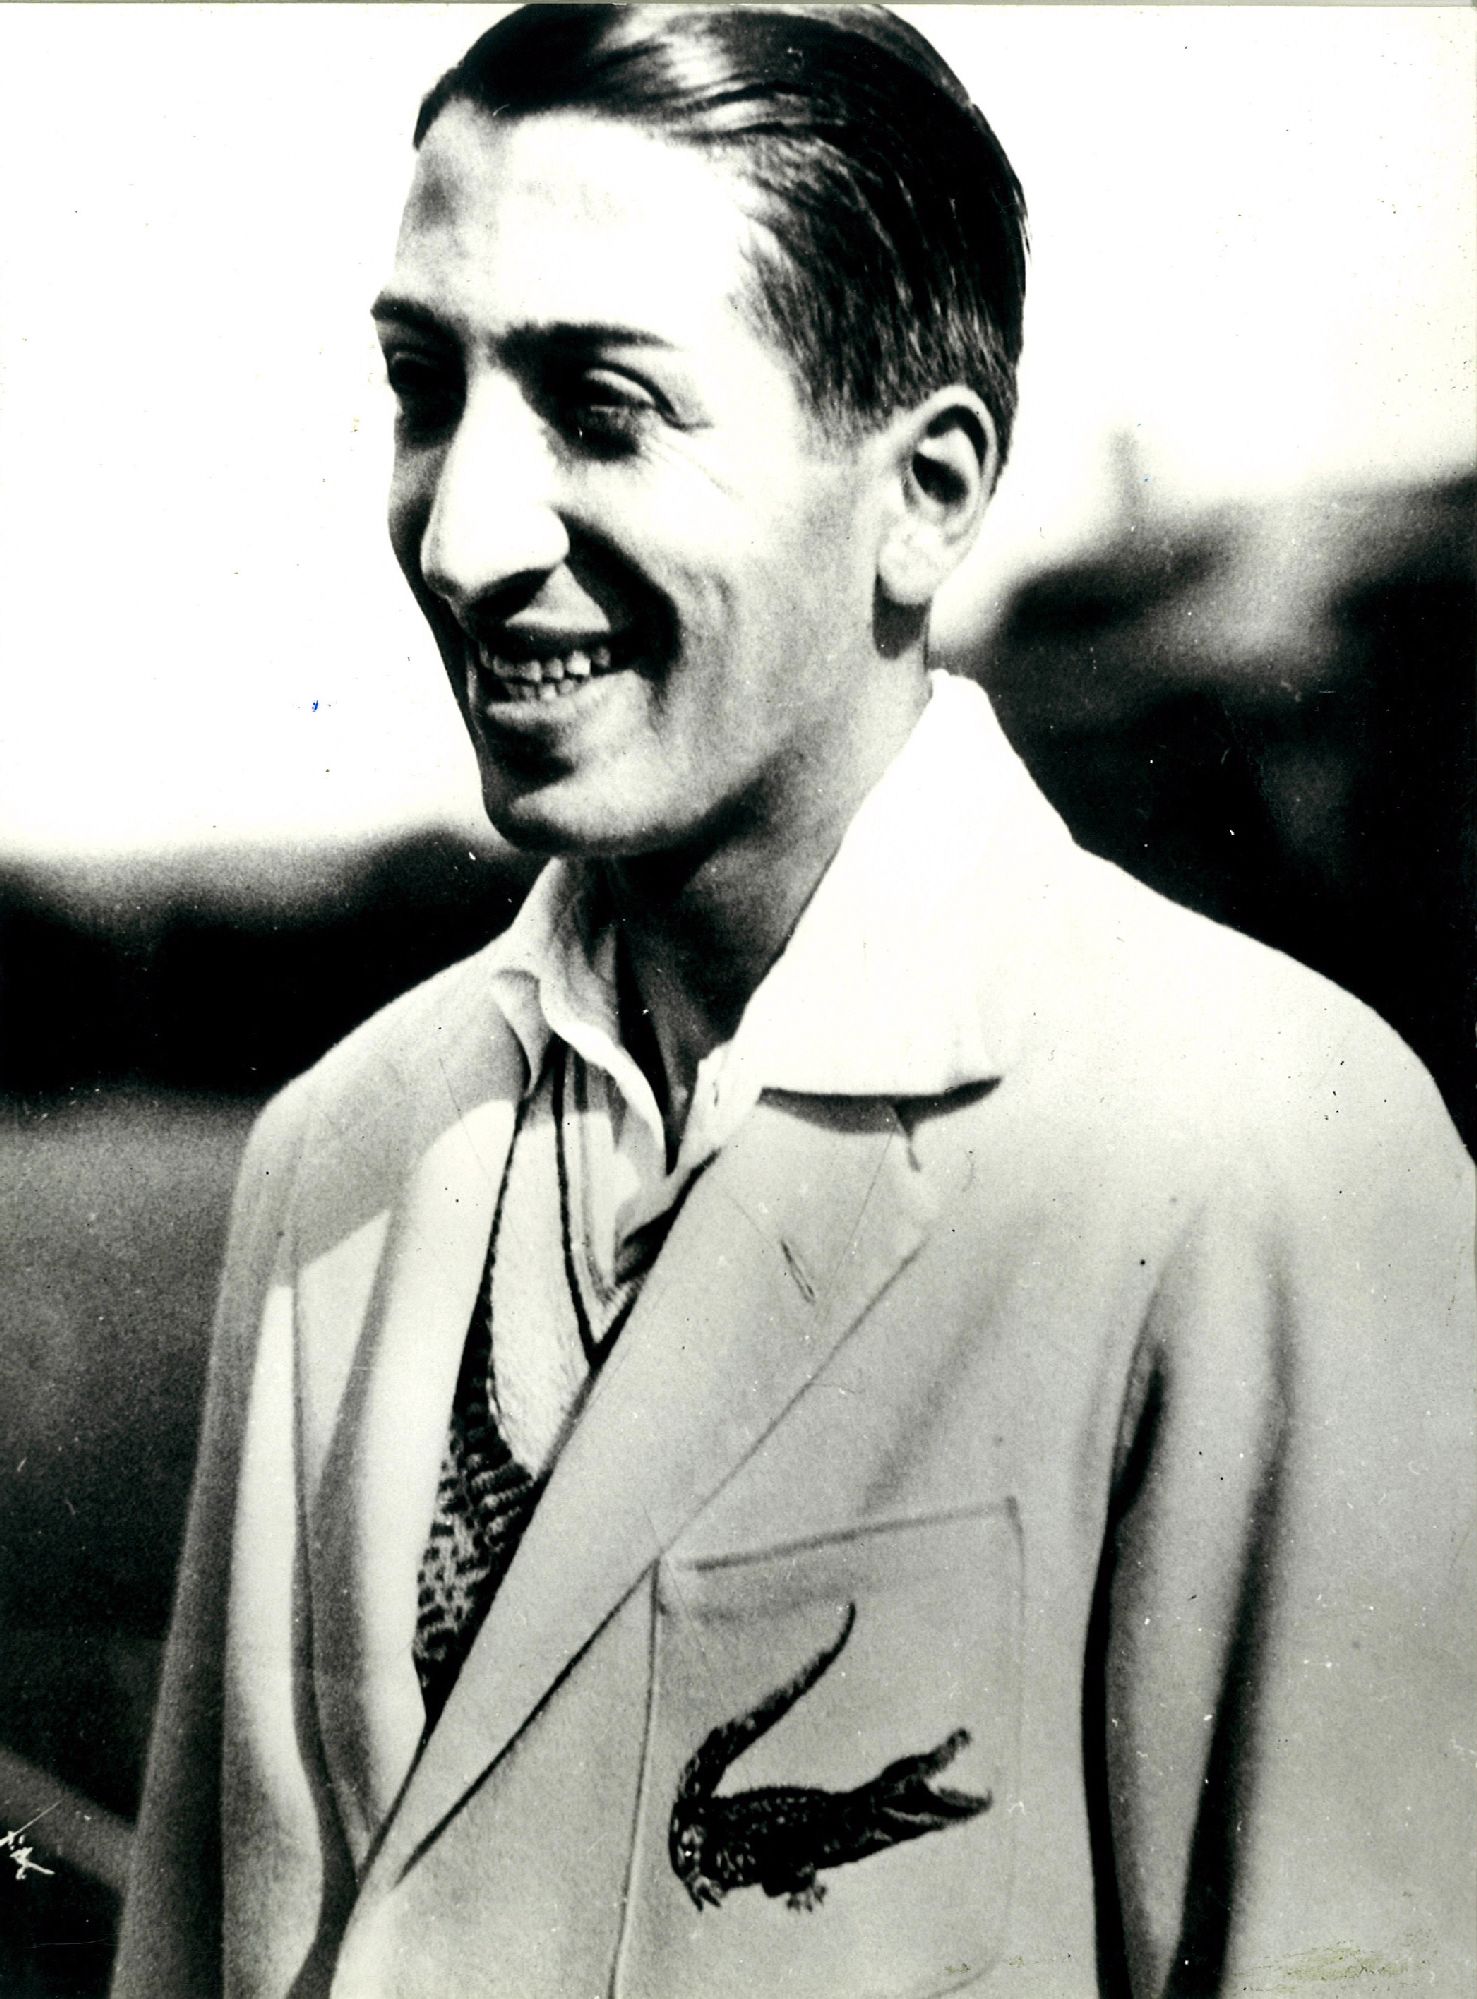 Gamle tider Pounding Porto 8 Things You Didn't Know About Lacoste - Rene Lacoste Biography And History